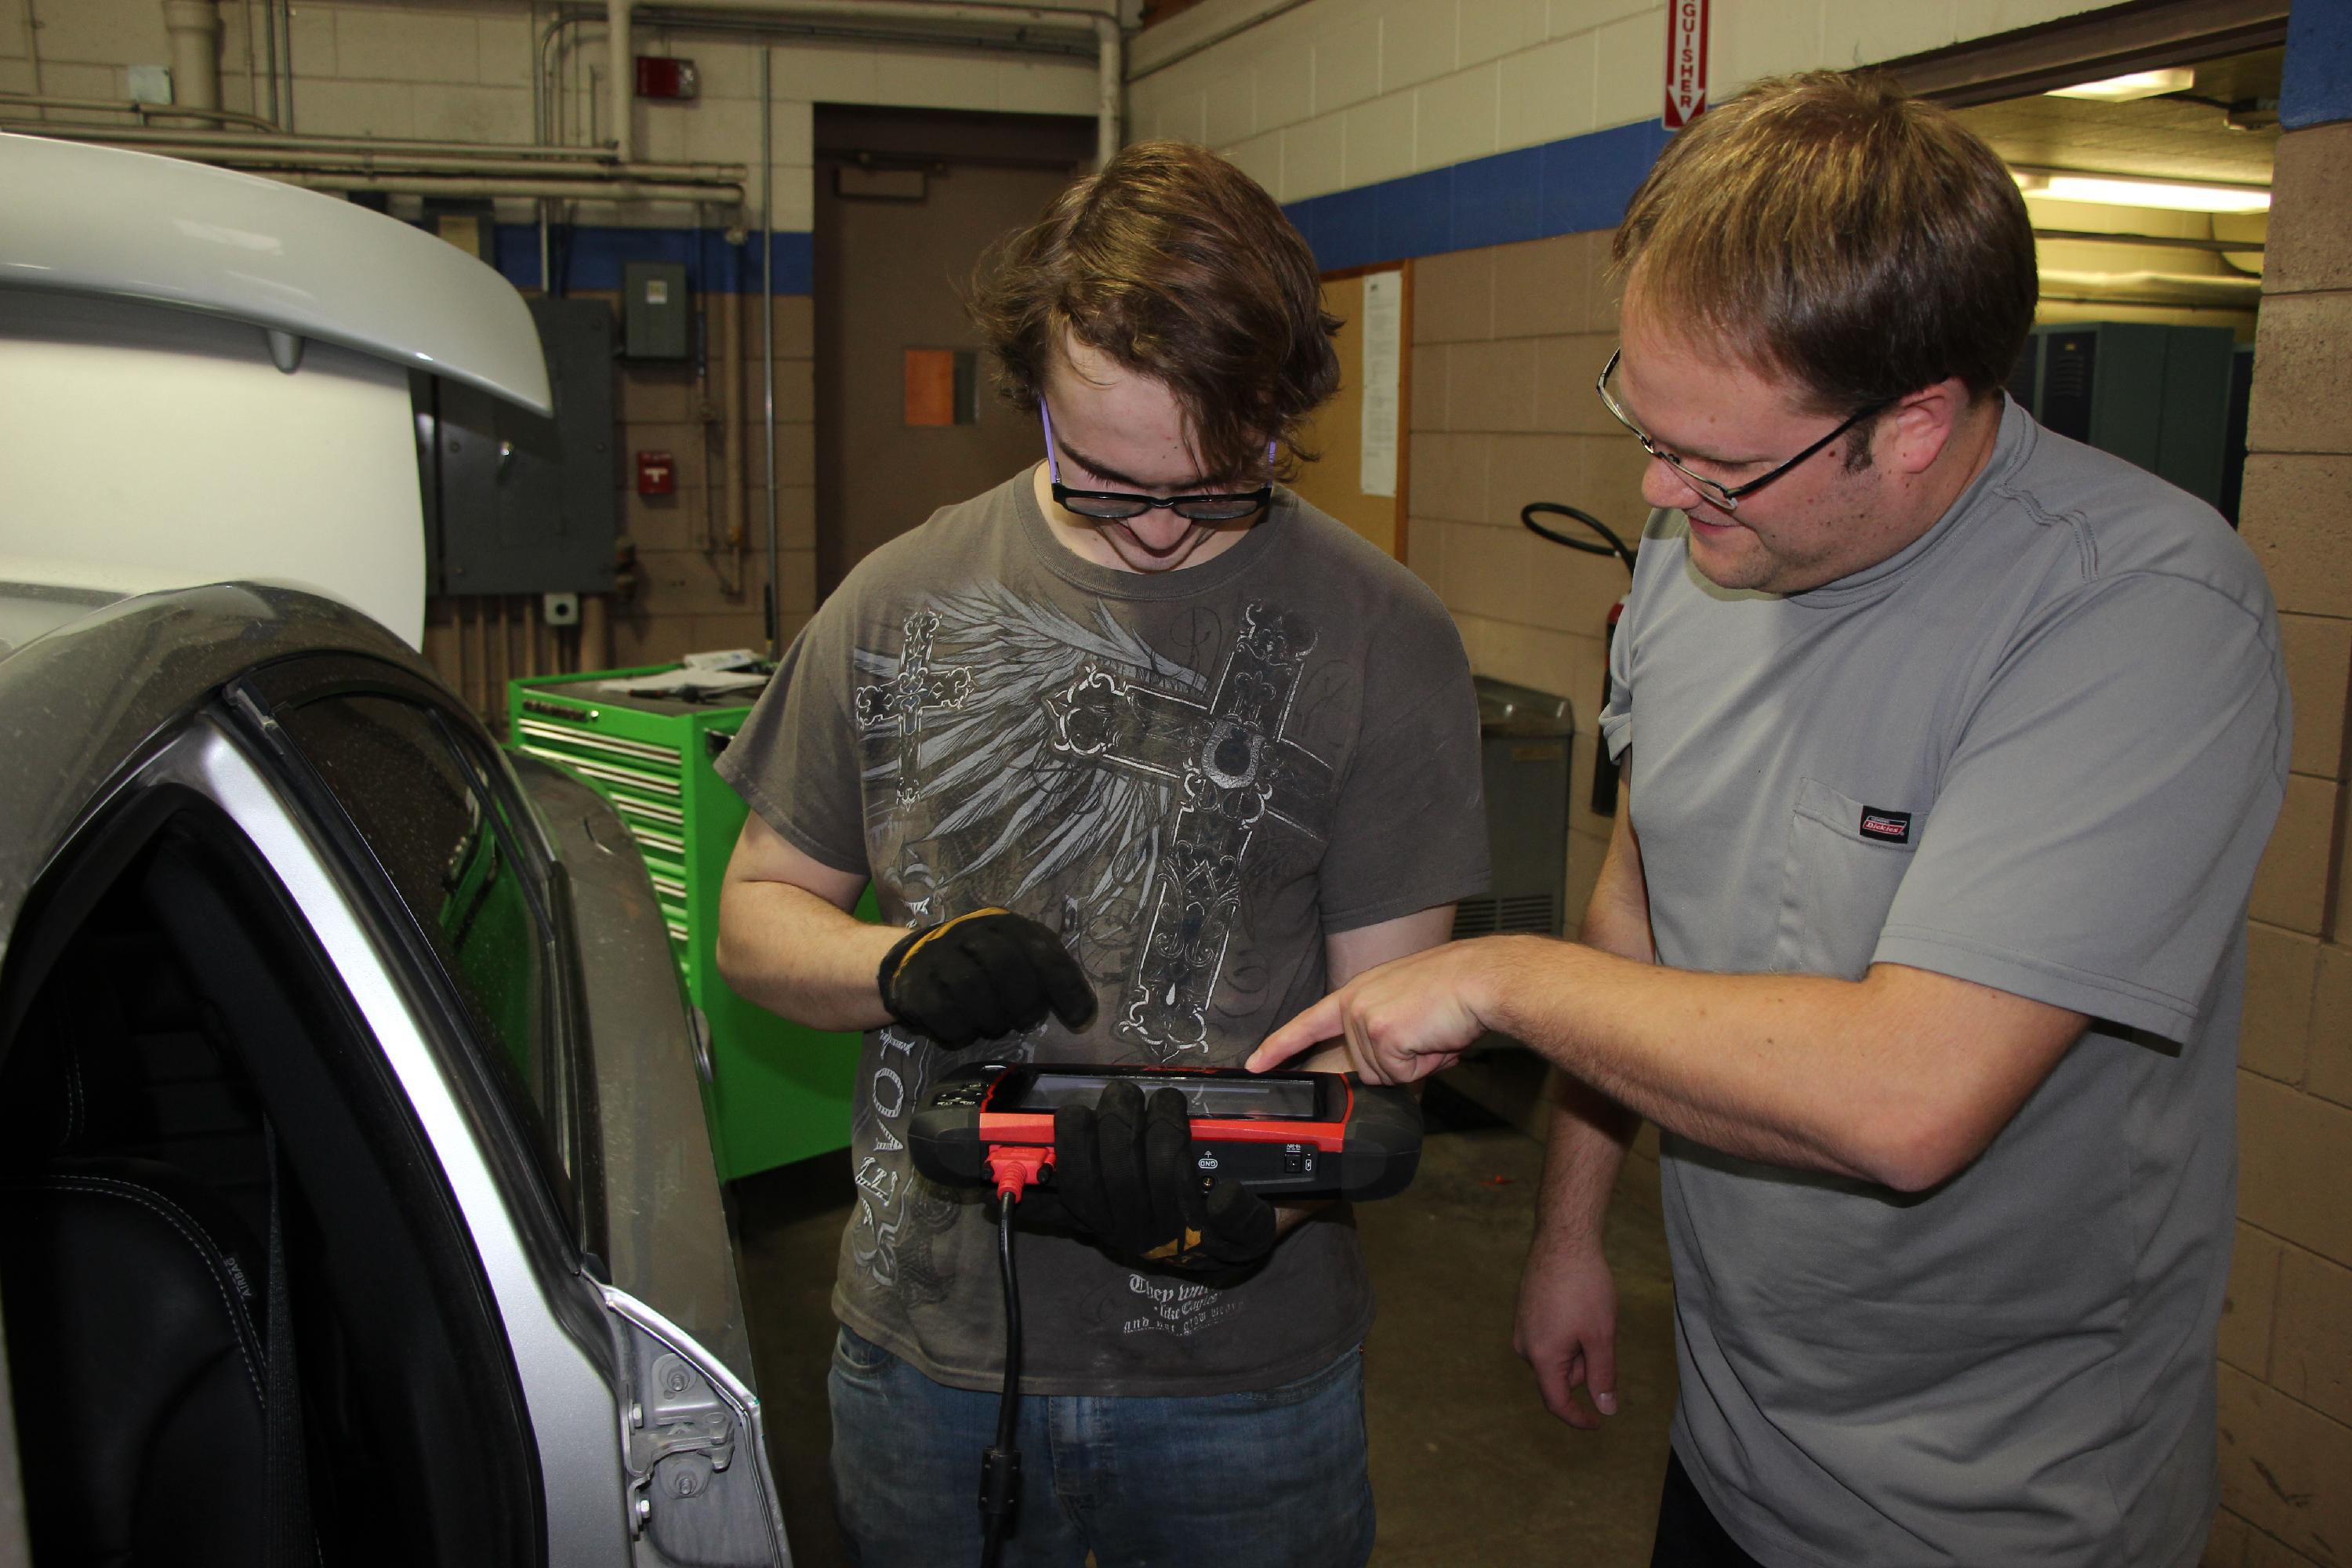 Auto service instructor shows a student how to use a computer system to diagnose an error in a car